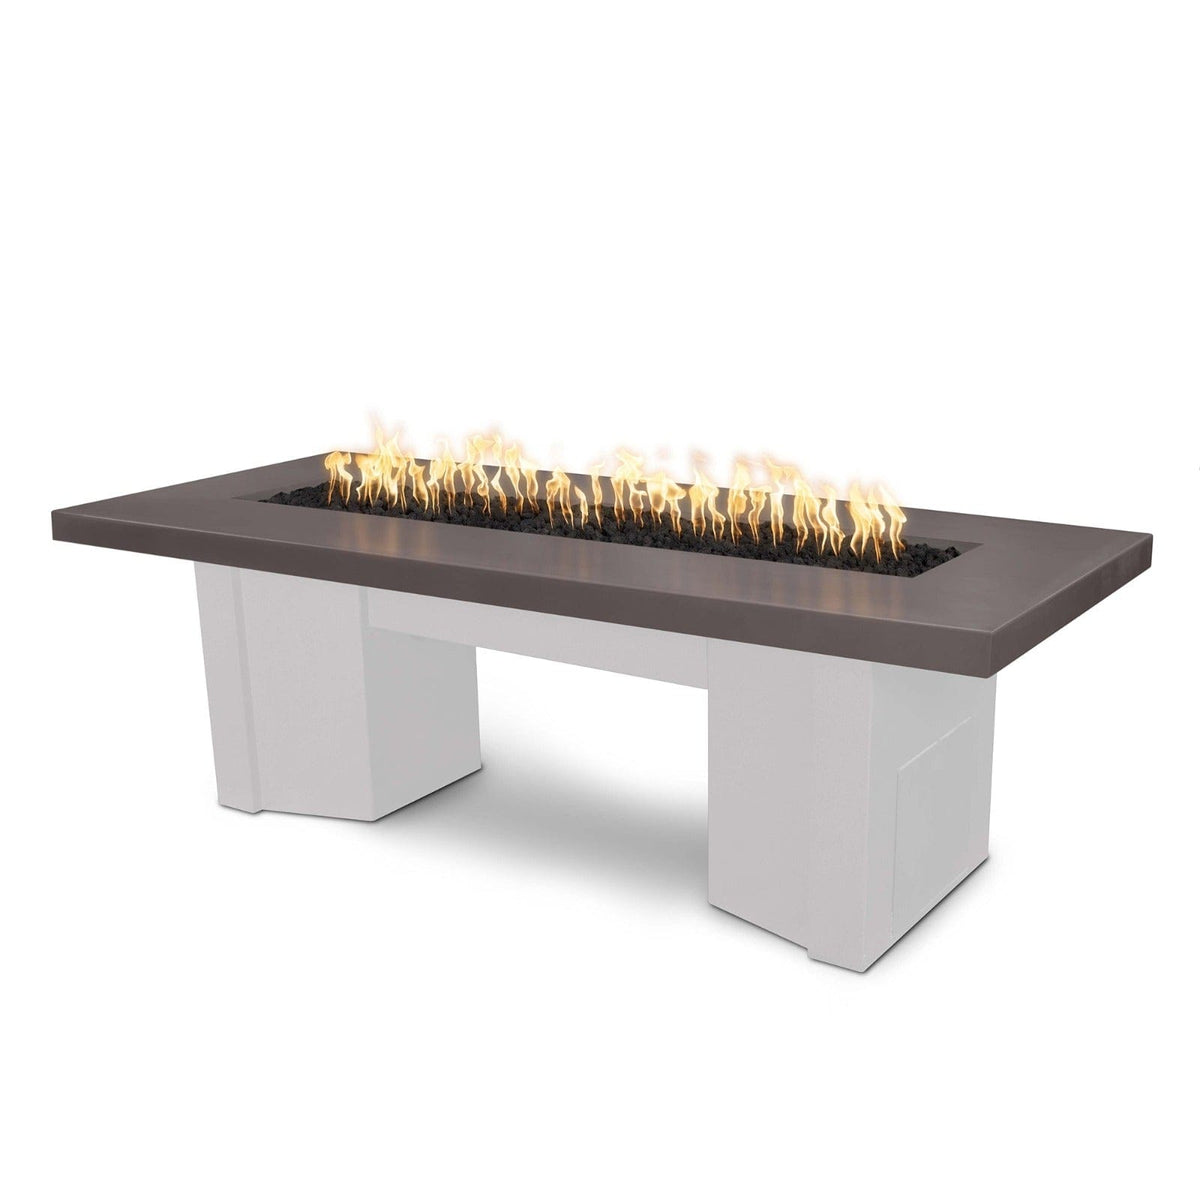 The Outdoor Plus Fire Features Chestnut (-CST) / White Powder Coated Steel (-WHT) The Outdoor Plus 78&quot; Alameda Fire Table Smooth Concrete in Liquid Propane - Match Lit with Flame Sense System / OPT-ALMGFRC78FSML-LP